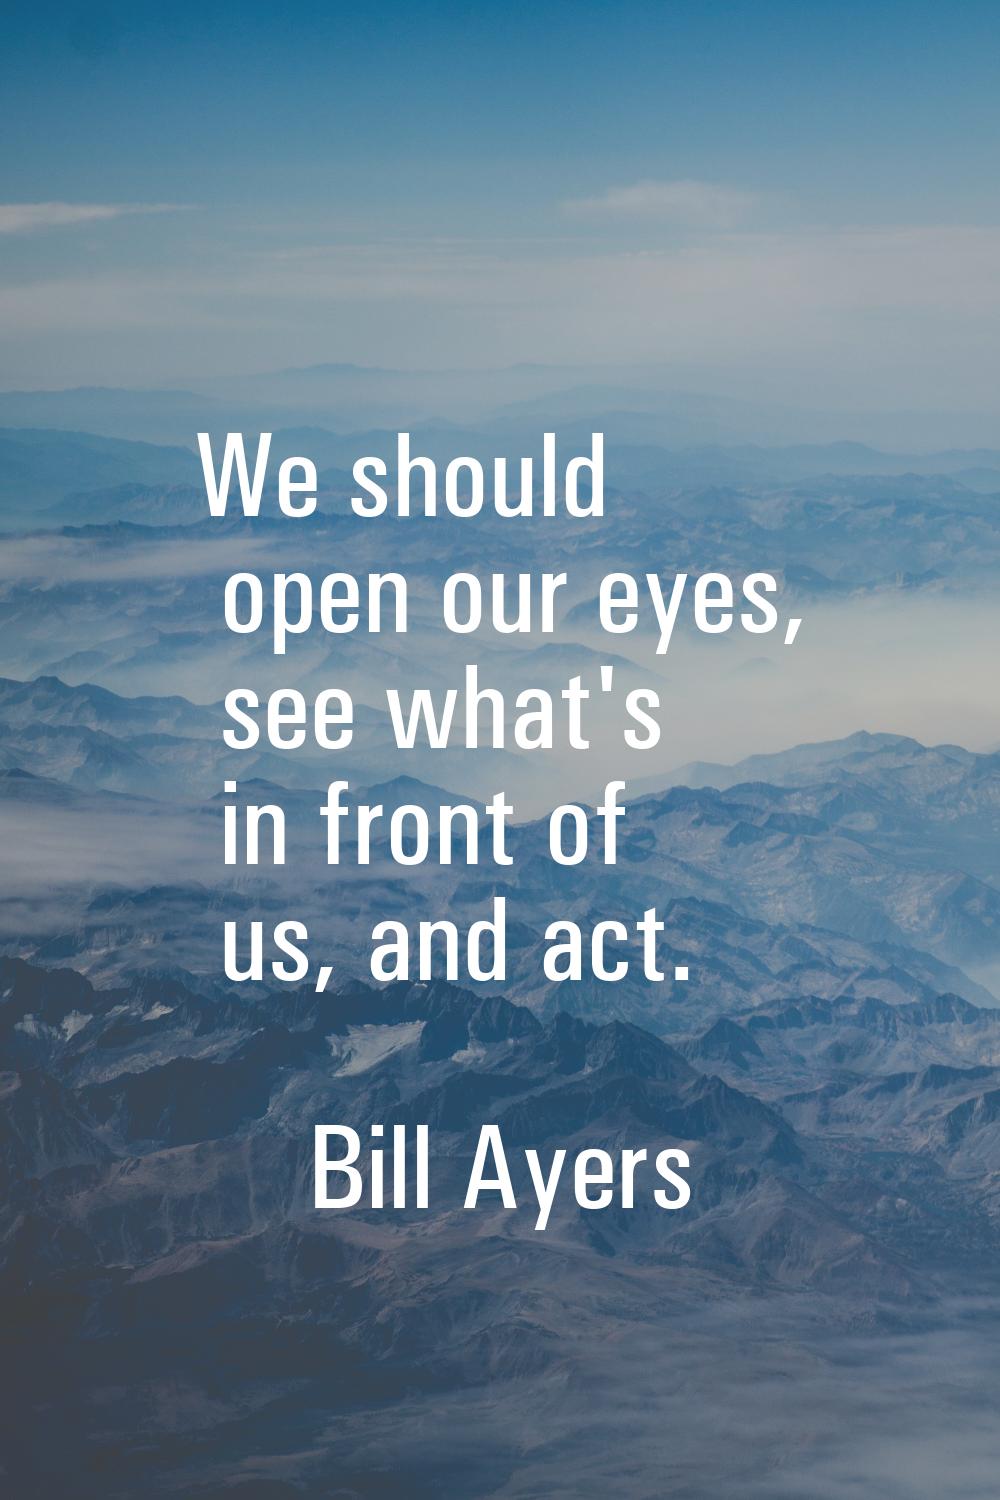 We should open our eyes, see what's in front of us, and act.